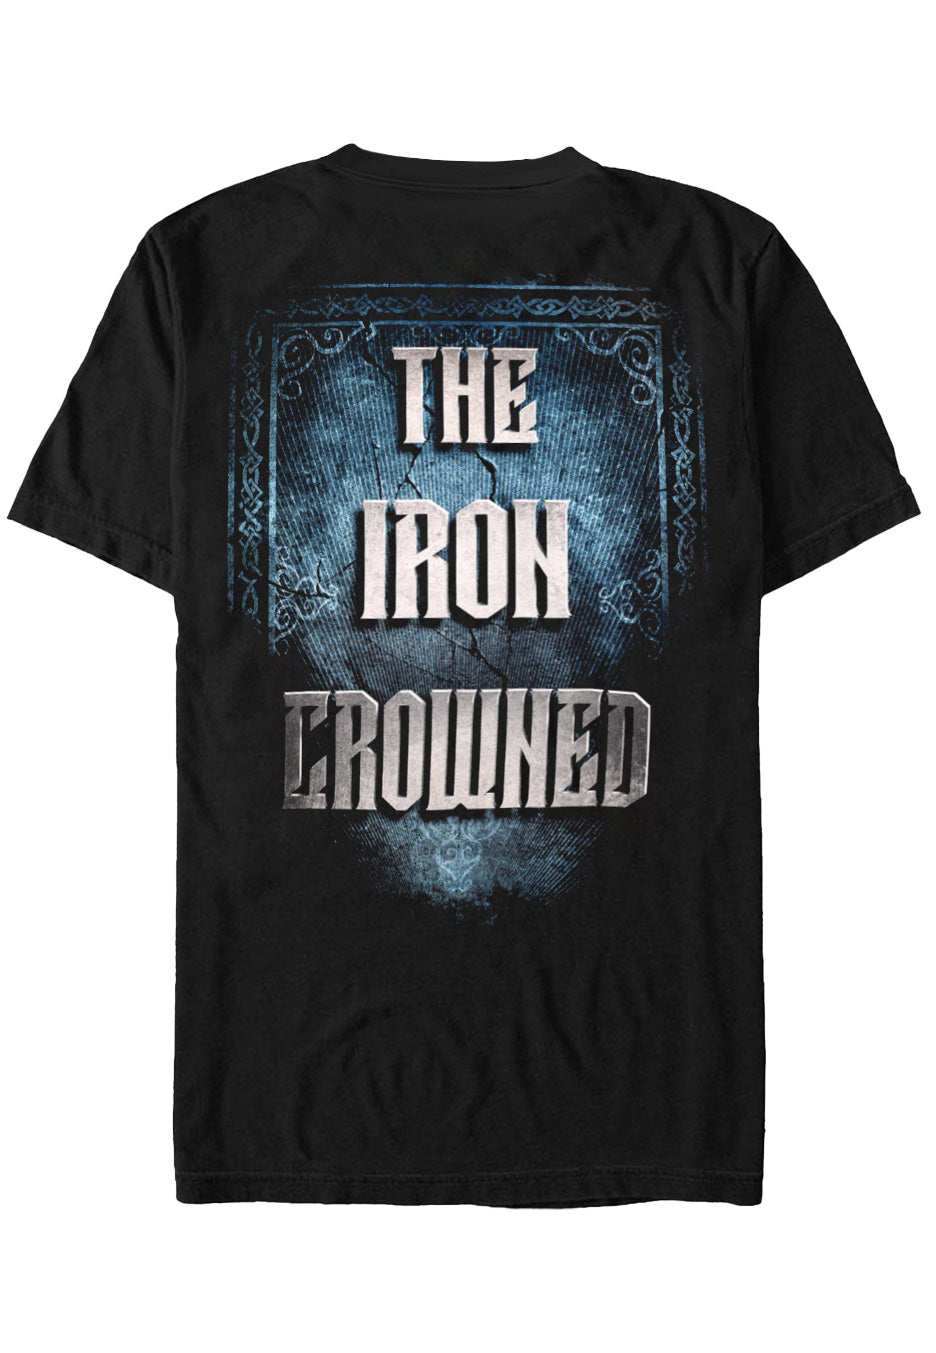 Blind Guardian - The Iron Crowned - T-Shirt